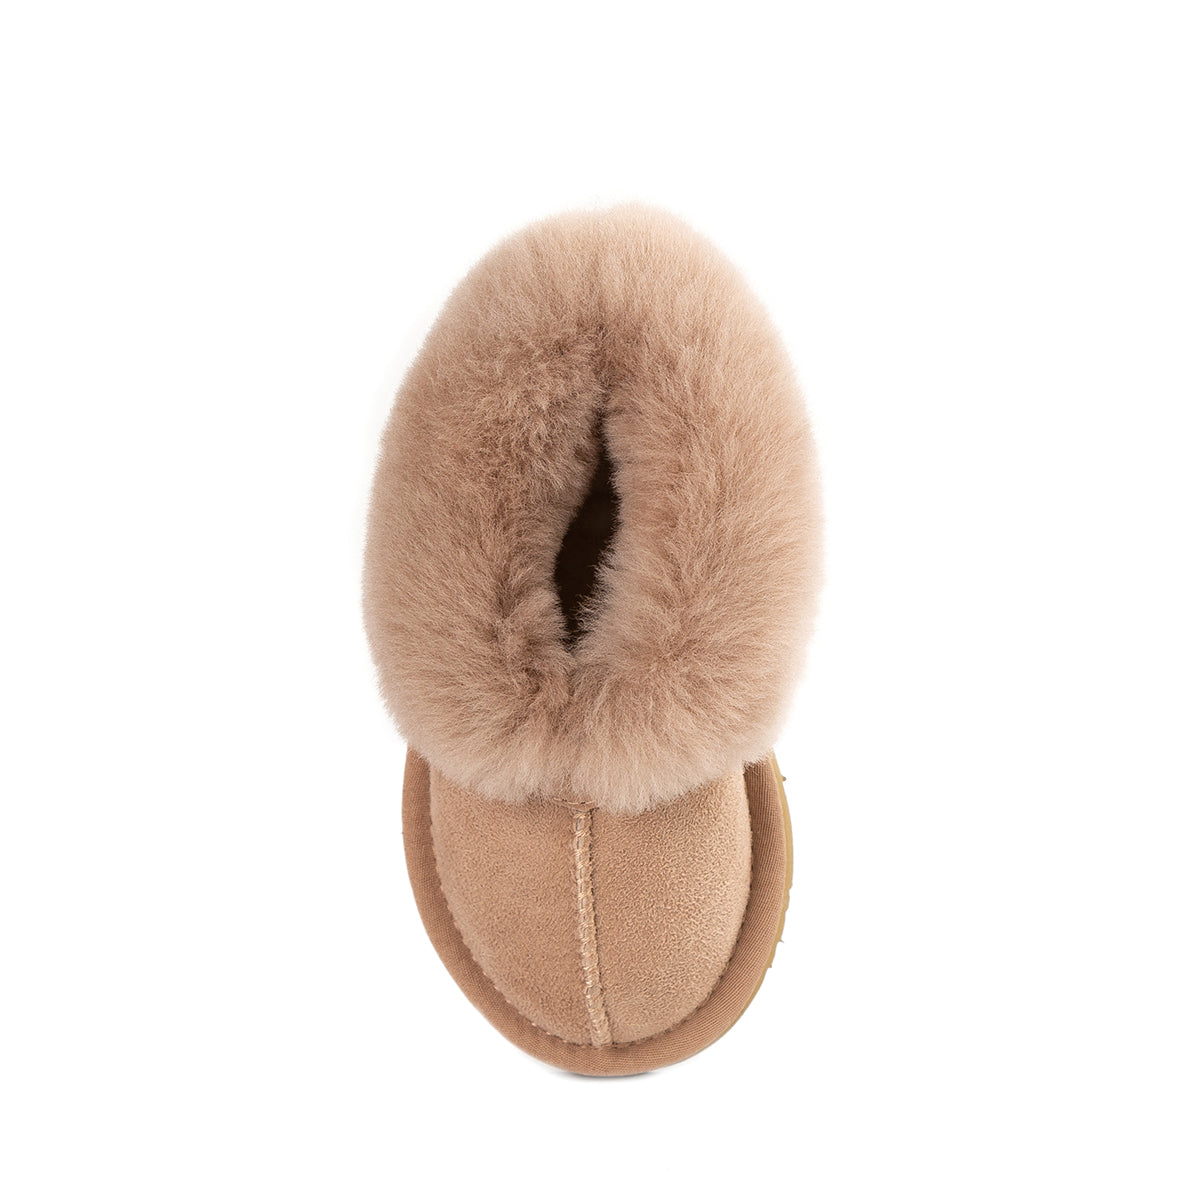 UGG Kids MELO slippers